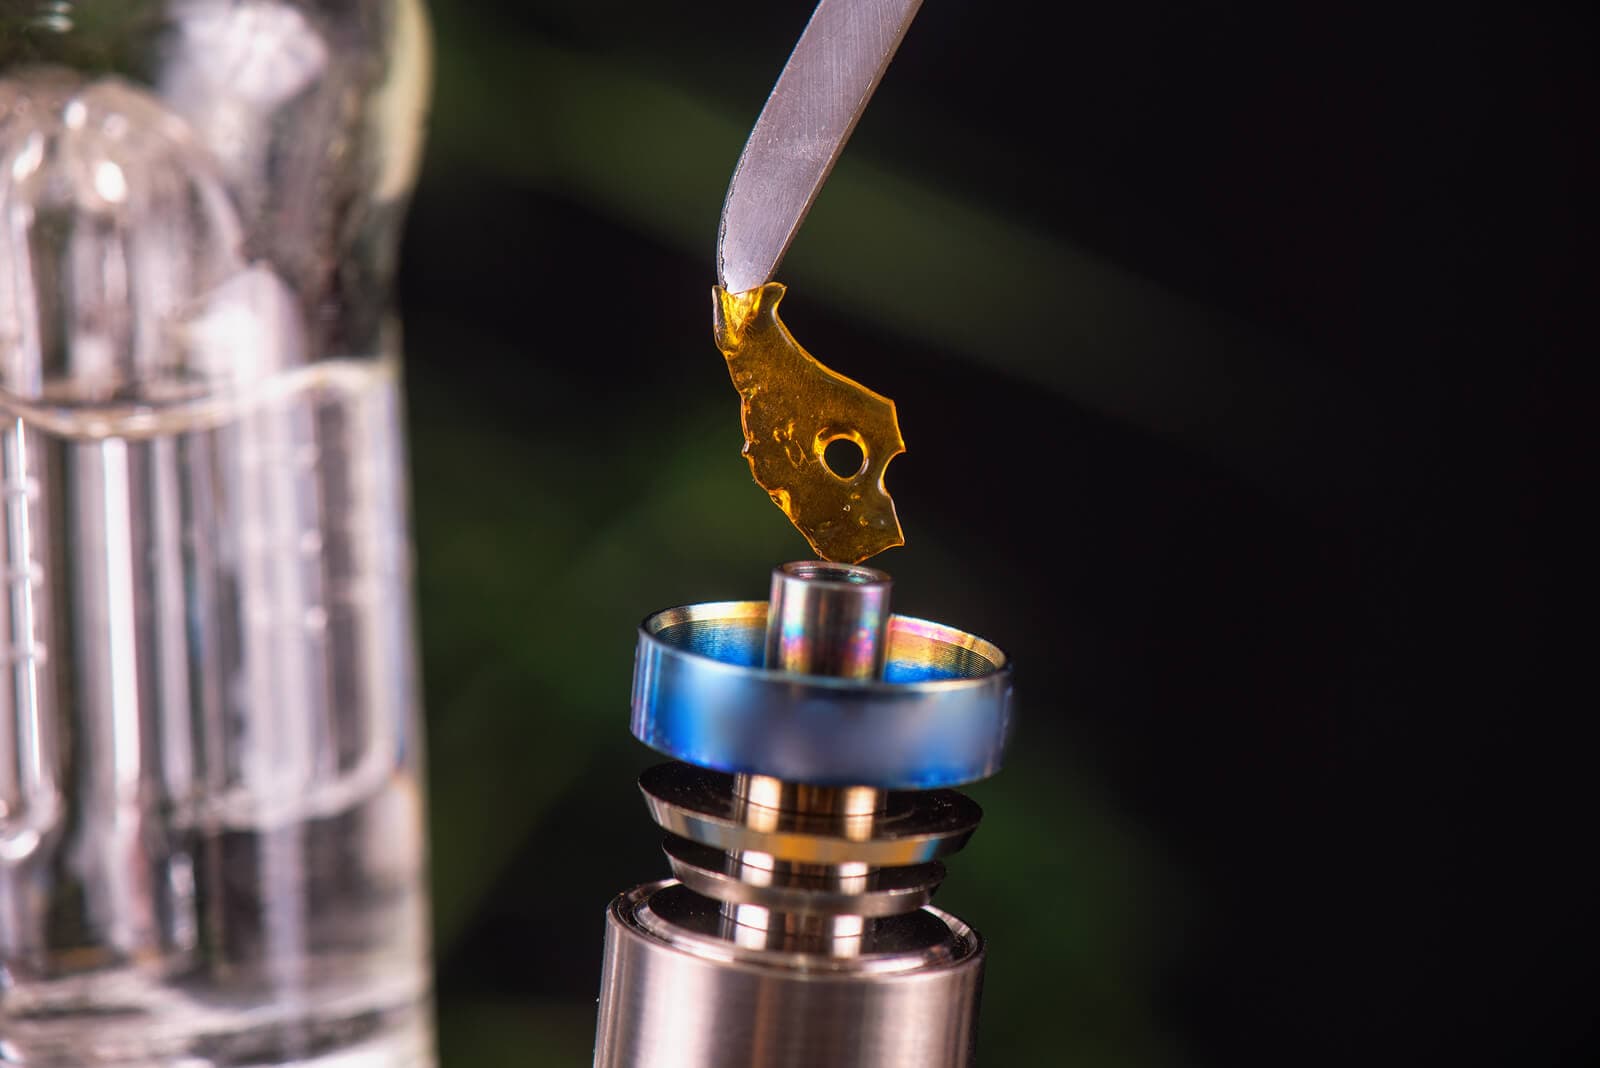 What is a Dab Tool? Dabber Definition